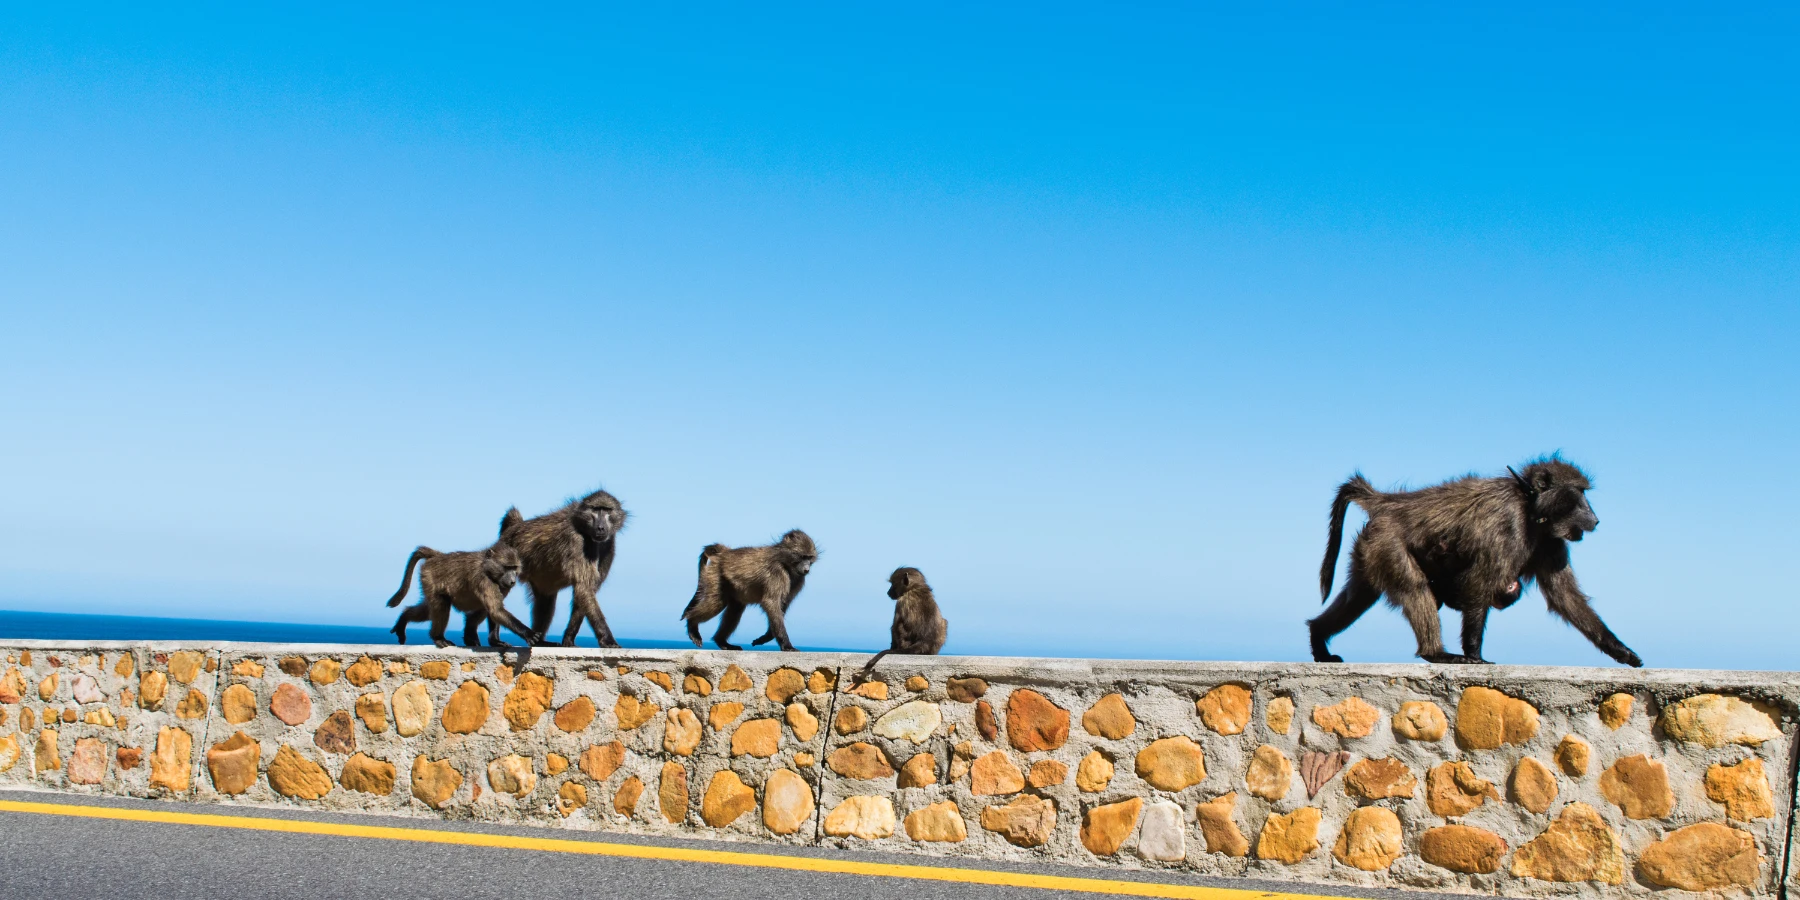 Road rules for roadside wildlife in South Africa